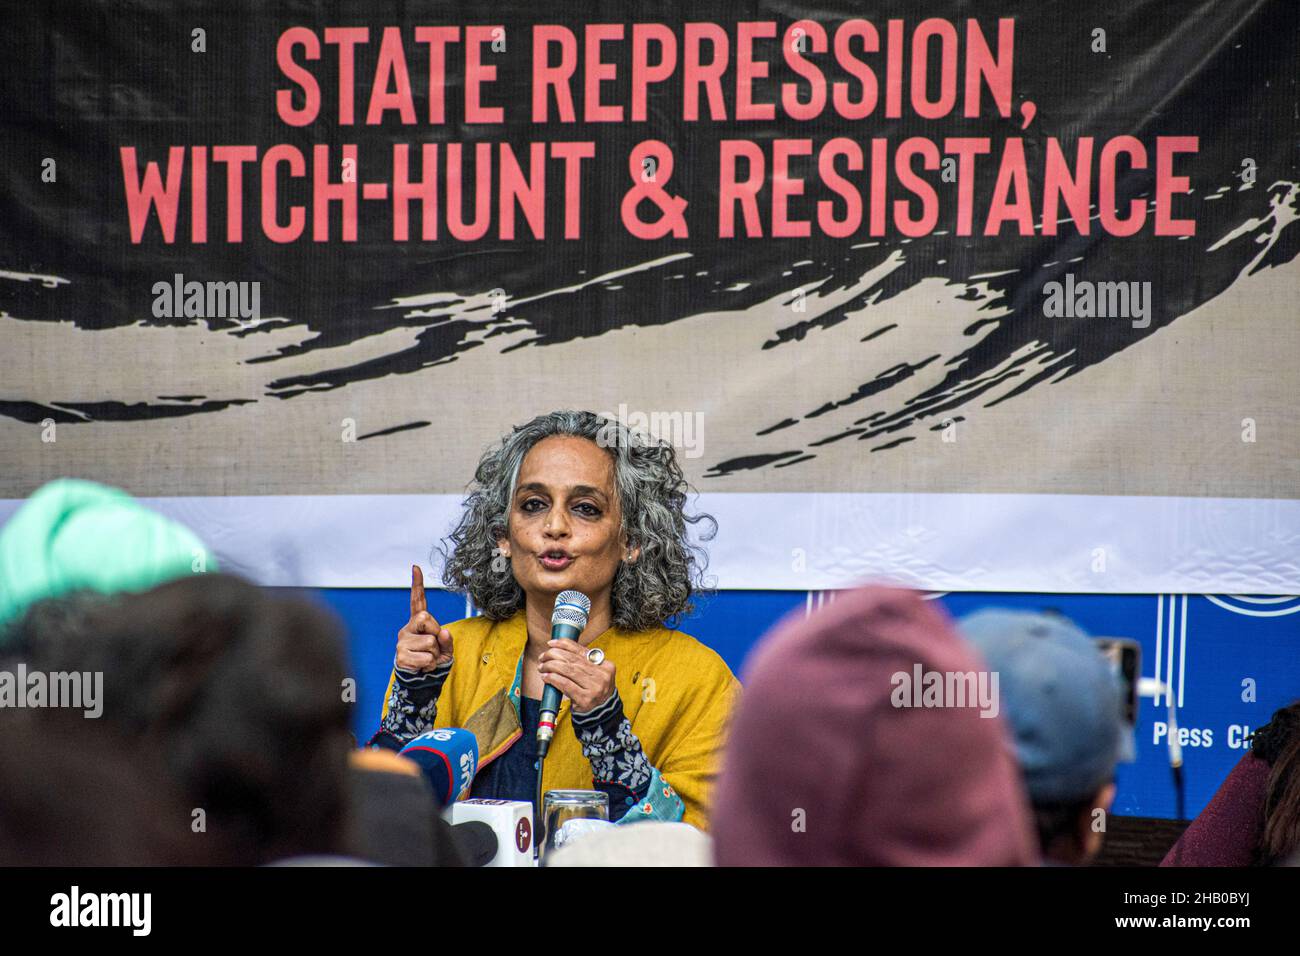 New Delhi, Delhi, India. 15th Dec, 2021. Arundhati Roy during the event marking 2 years of Attack on Jamia Millia Islamia, Central University on 15th December 2019.On 15th December 2019 the Delhi Police and the RAF officials entered the University without permission of the administration. The police and RAF officials made disproportionate use of force against students. Amongst other weaponries, pellets, rubber bullets and even live ammunition was discharged against young, protesting students. Tear gas shells and sound bombs were used indiscriminately, including in confined spaces. Police a Stock Photo